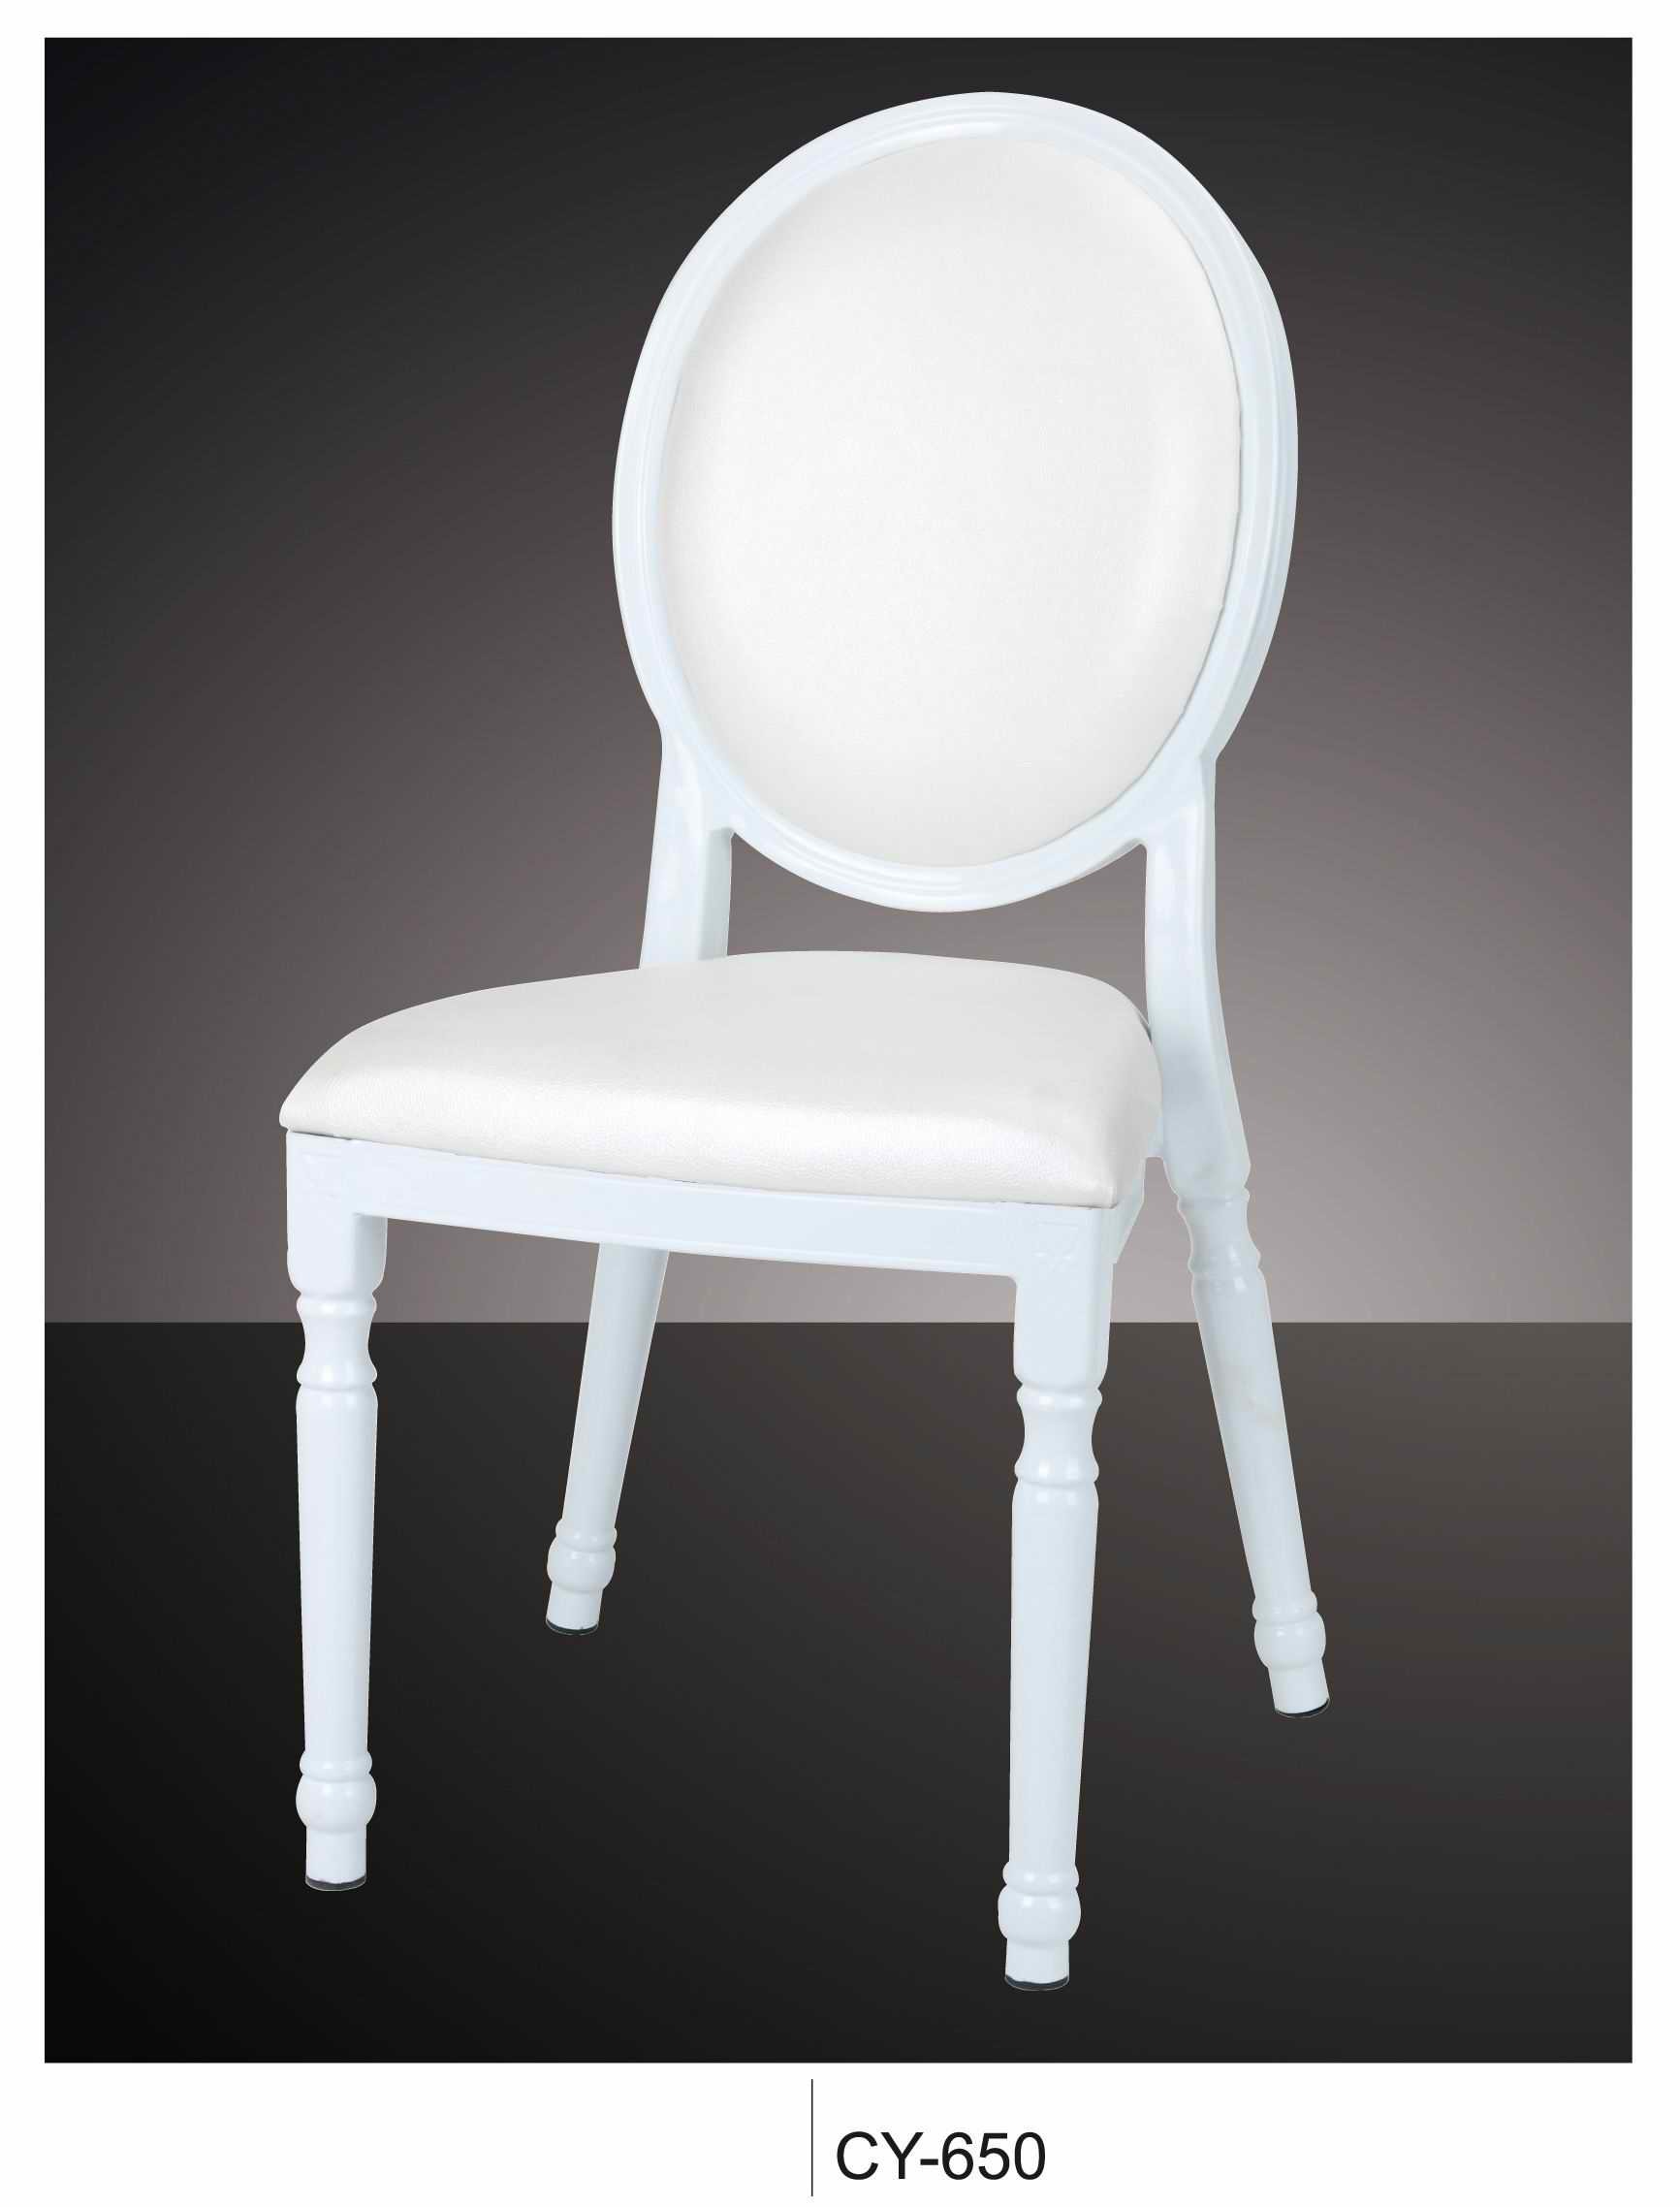 Hotel Round Back Wood-Look Aluminum Banquet Chairs